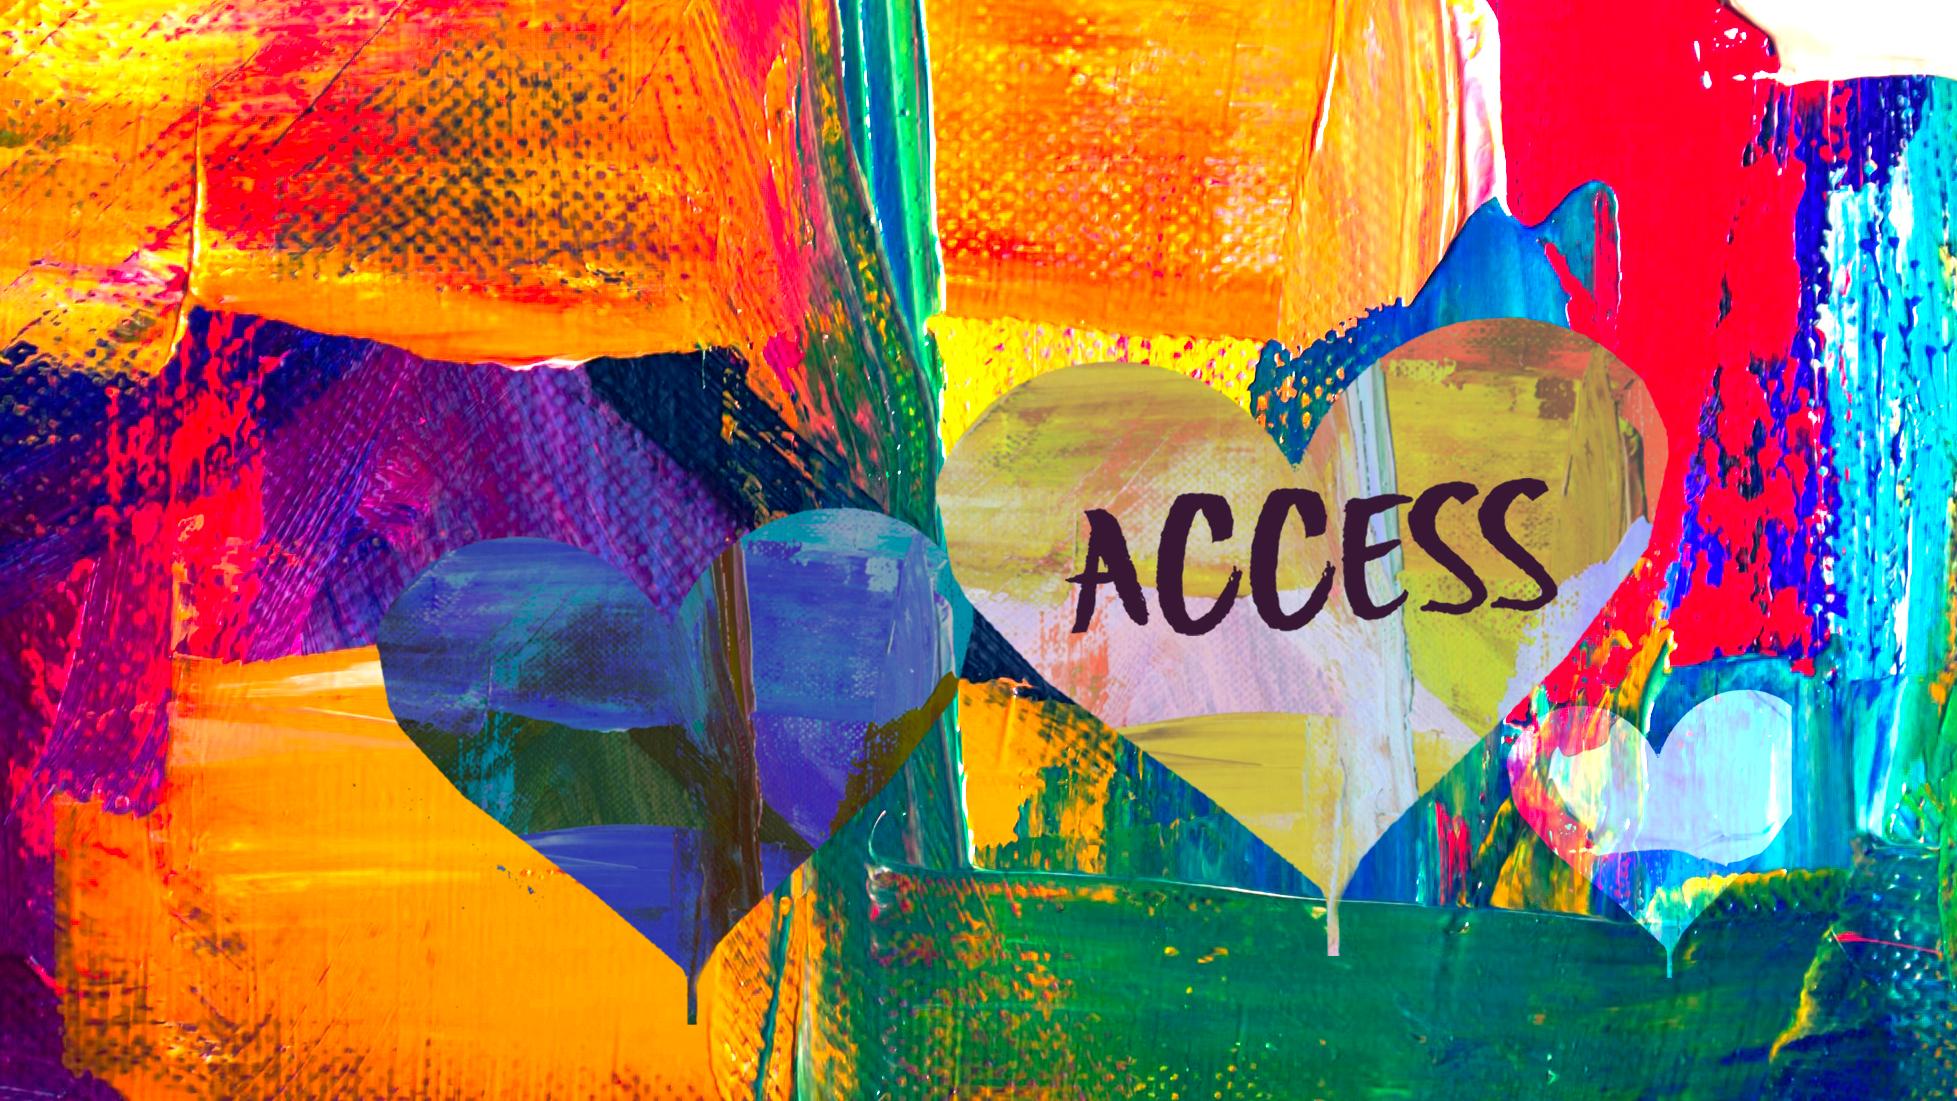 Love is Access/"Access Is Love": A Film Shorts Program